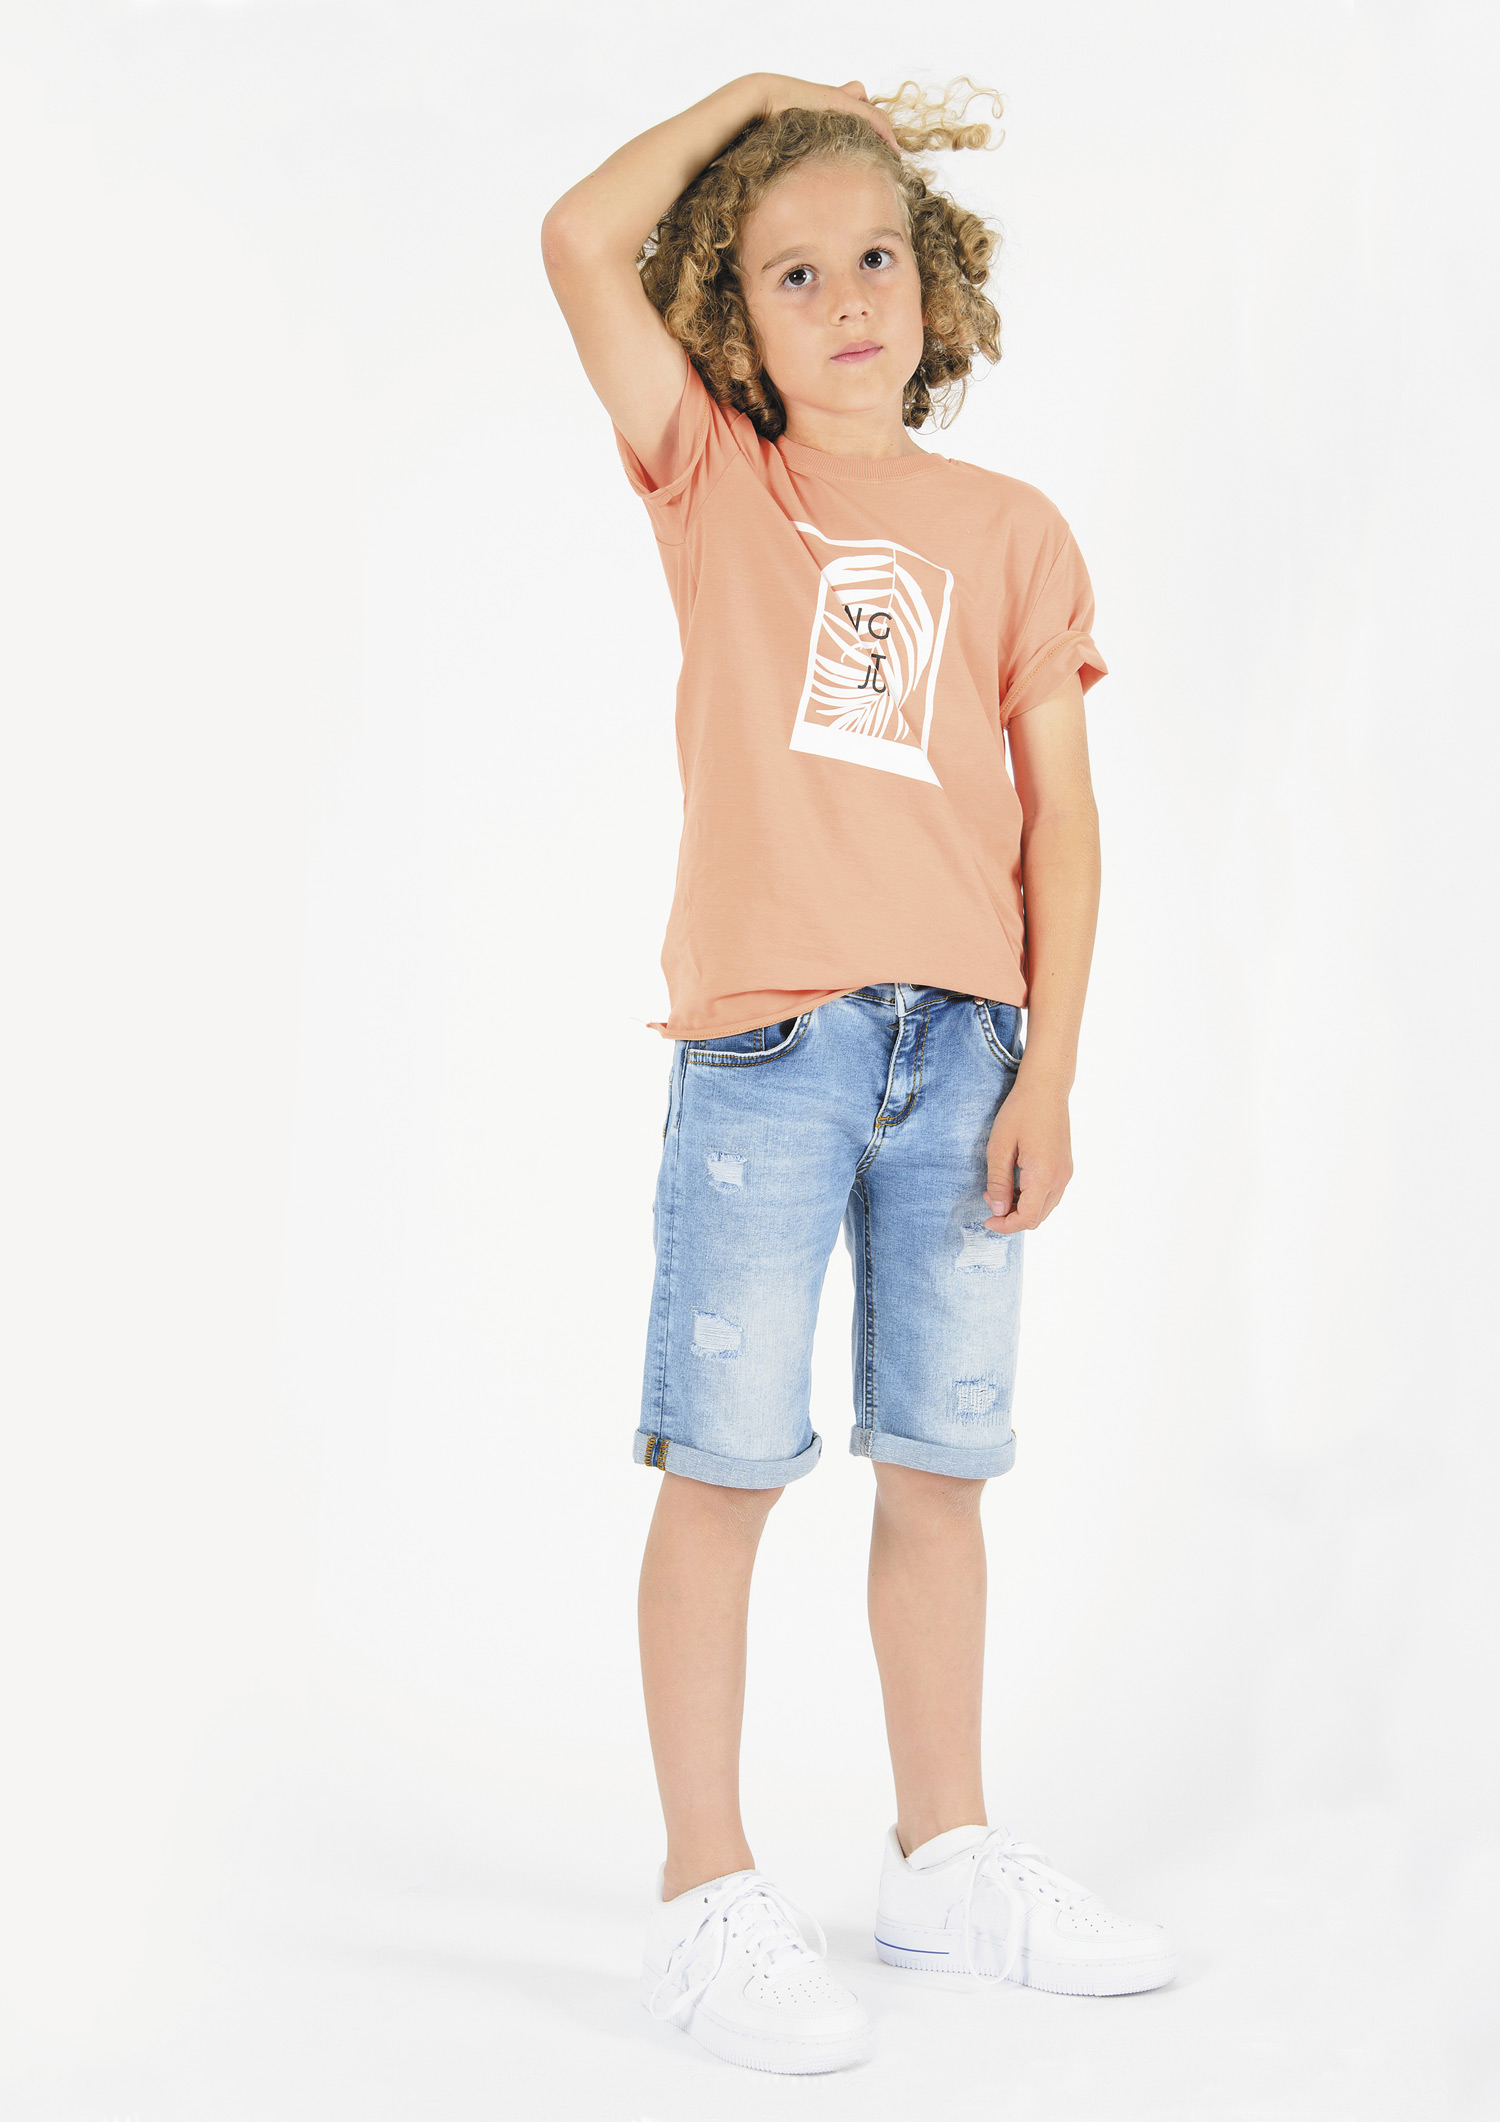 6203-Boys T-Shirt -Hang out in the Jungle